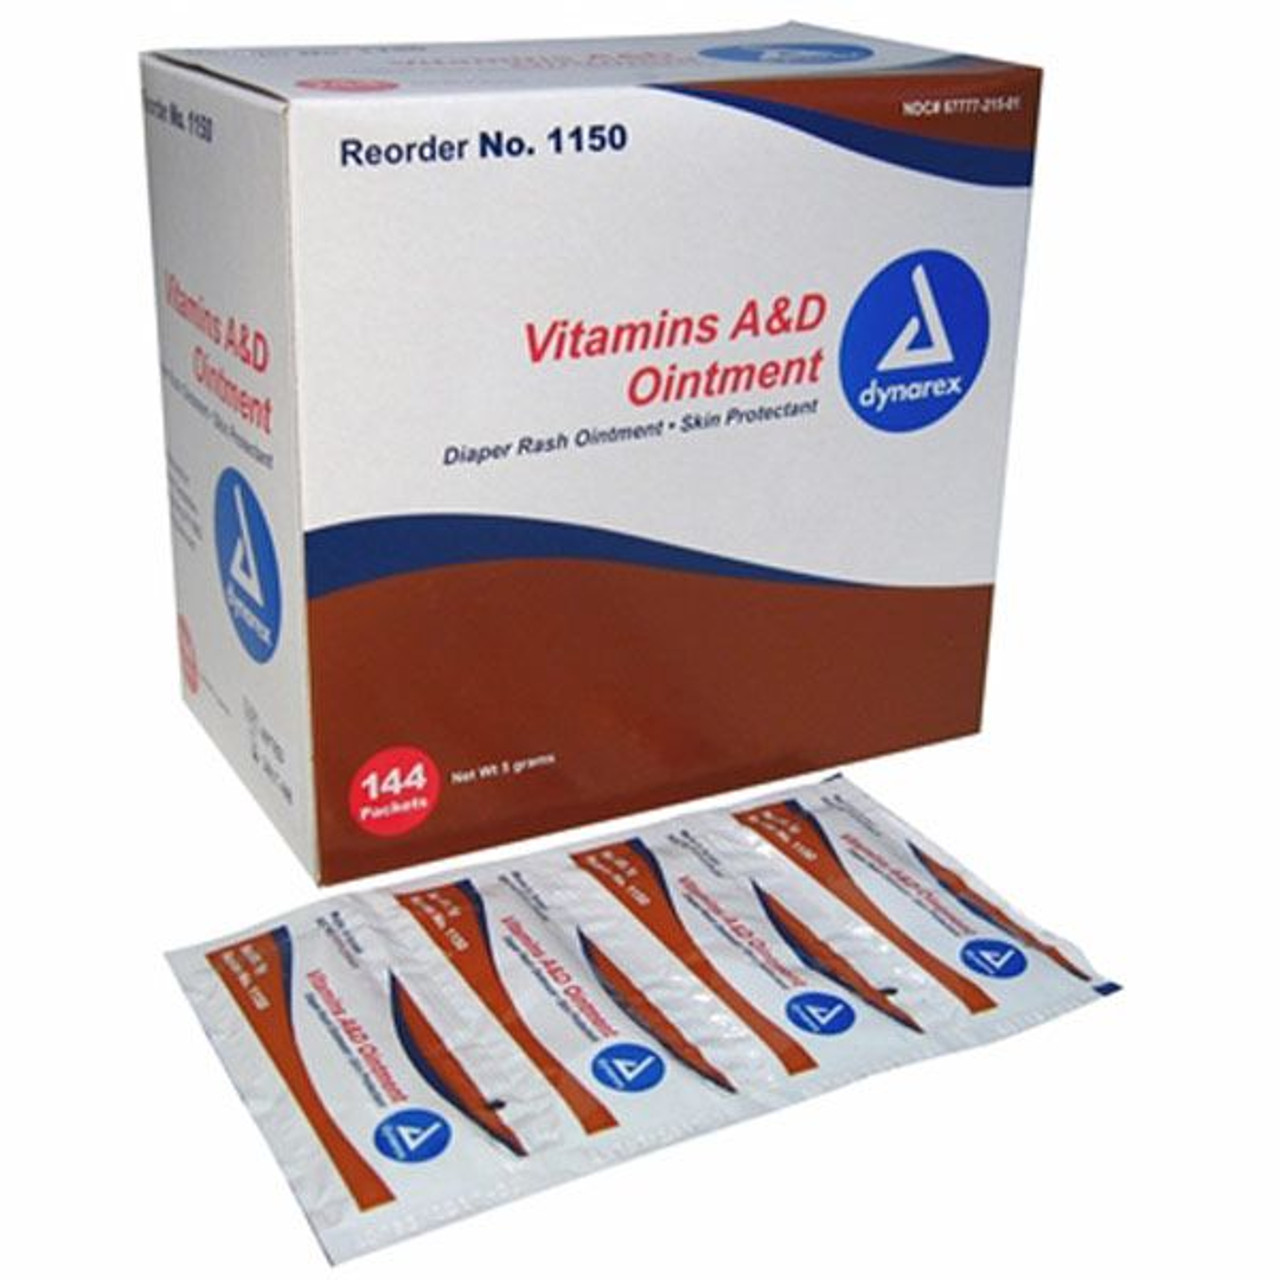 Vitamins A&D Ointment Packet - 144pk